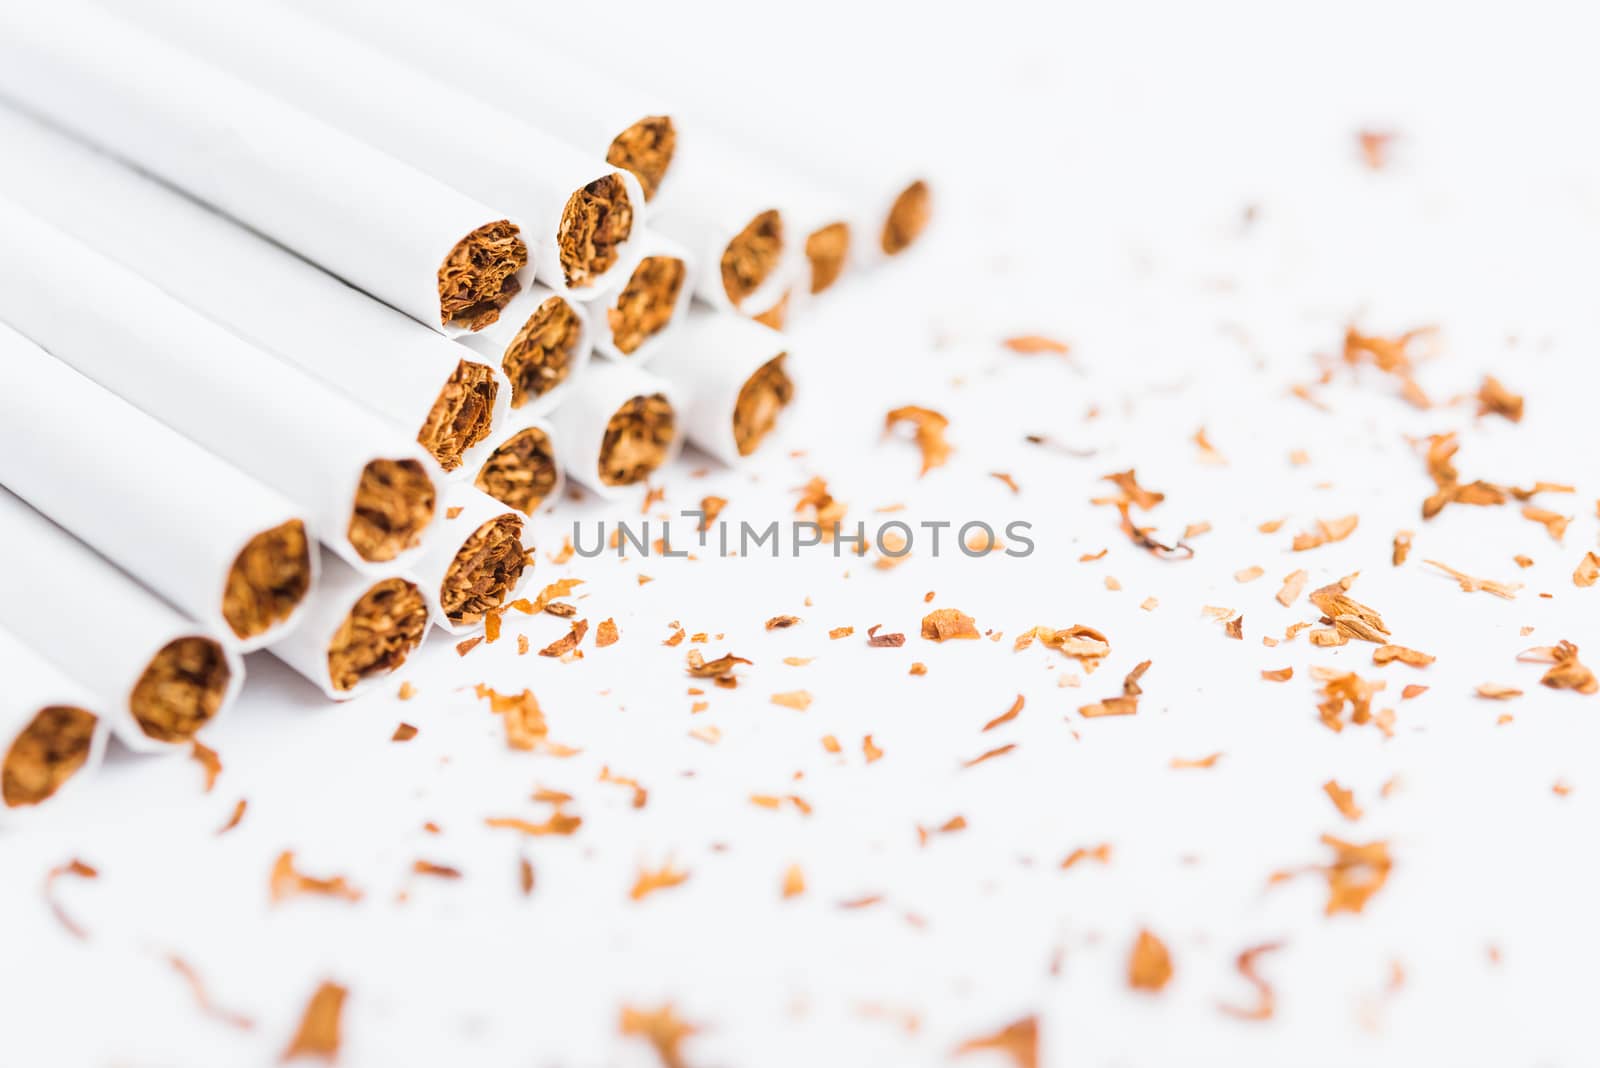 31 May of World No Tobacco Day, Close up front stack pile cigarette or tobacco on white background with copy space, Warning lung health concept